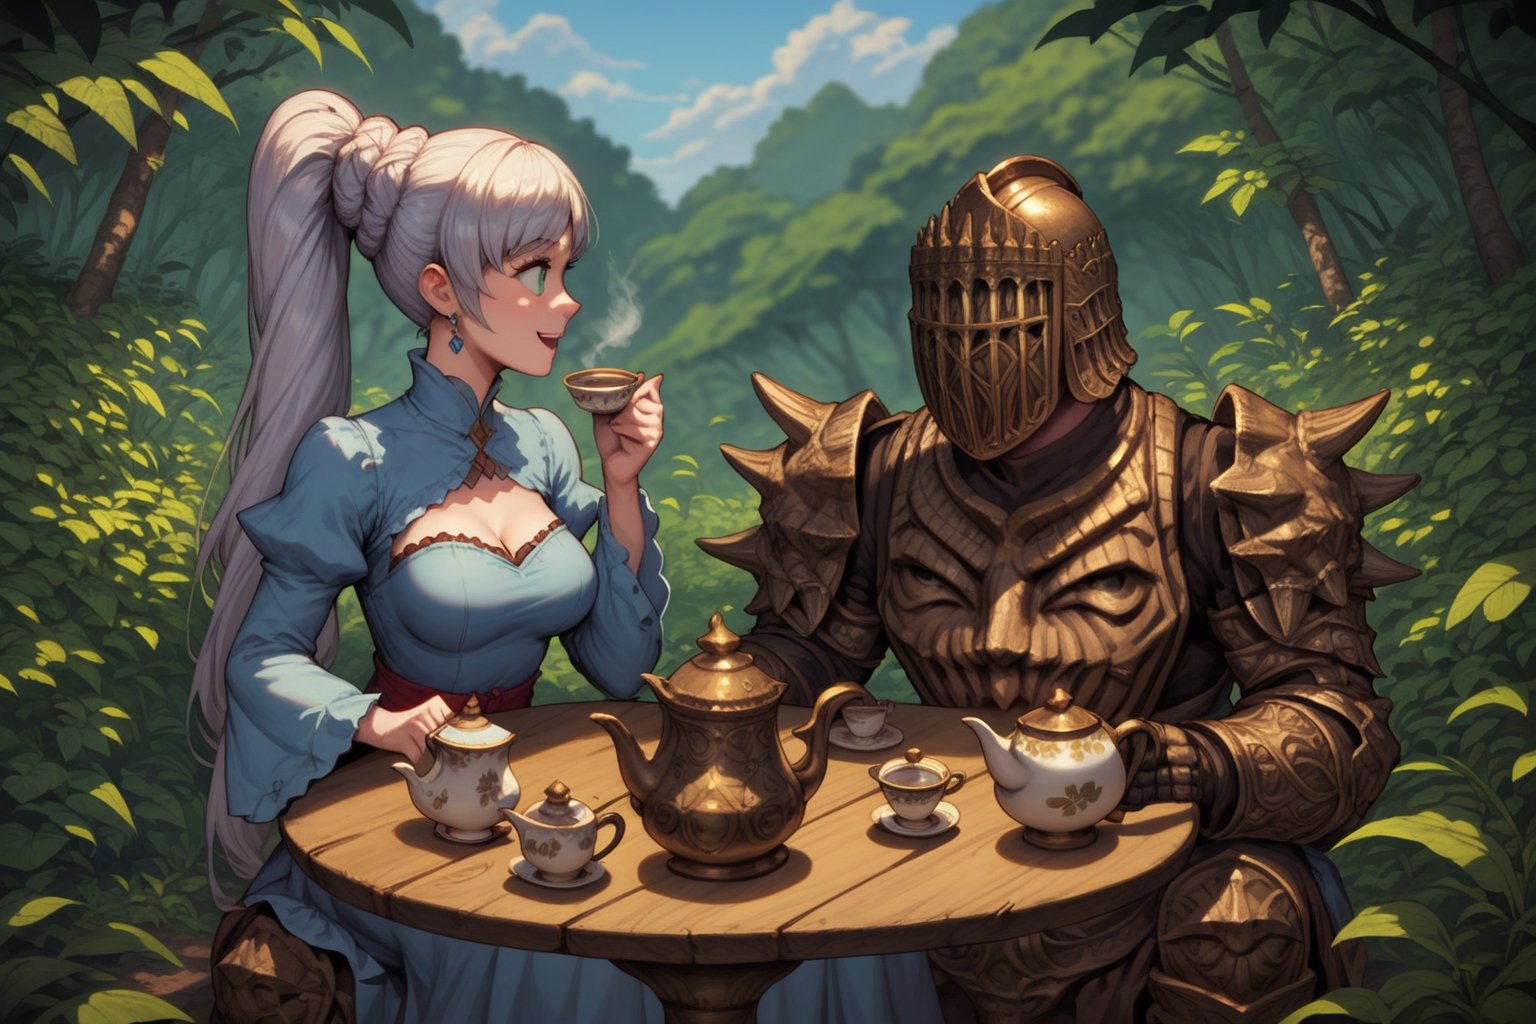 score_9, score_8, score_7, score_8_up, 1boy\(human, dark skin, giant, tall, wearing full madness Armor and helmet\) with woman\(medium breasts, Weiss Schnee wearing dress, happy, seductive\), both sitting and eating. (Tea cups, tea pot, parmesan on the table), jungle, both staring at each other, score_7_up, side view, 2d, anime